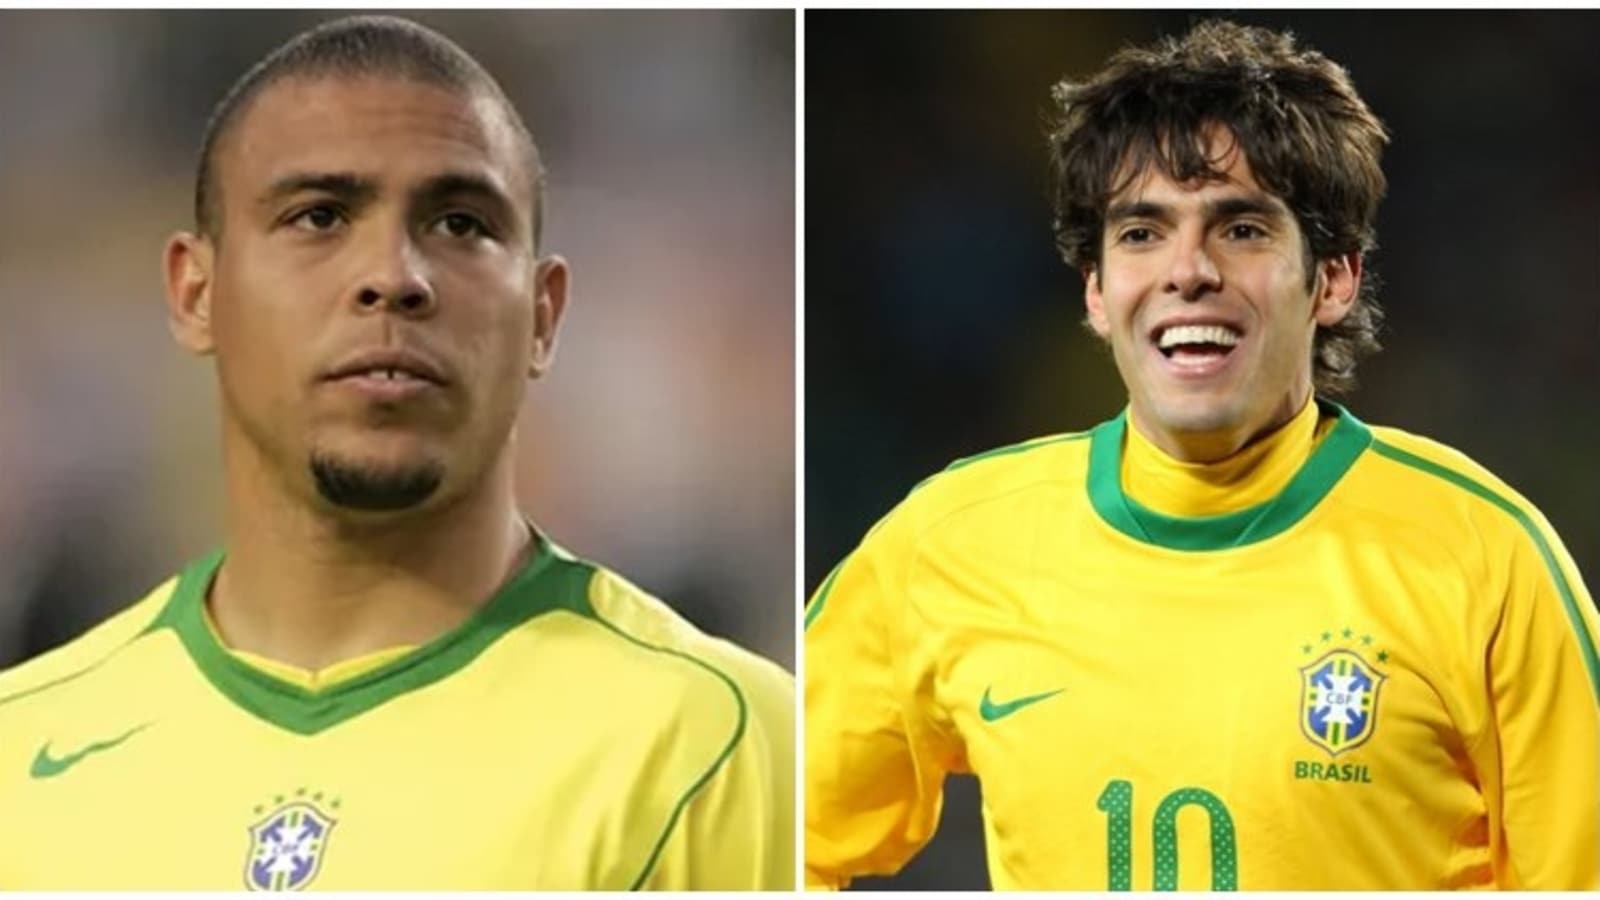 ‘His English is not great’: Brazil legend Ronaldo reacts to Kaka’s ‘fat man walking down the street’ comment